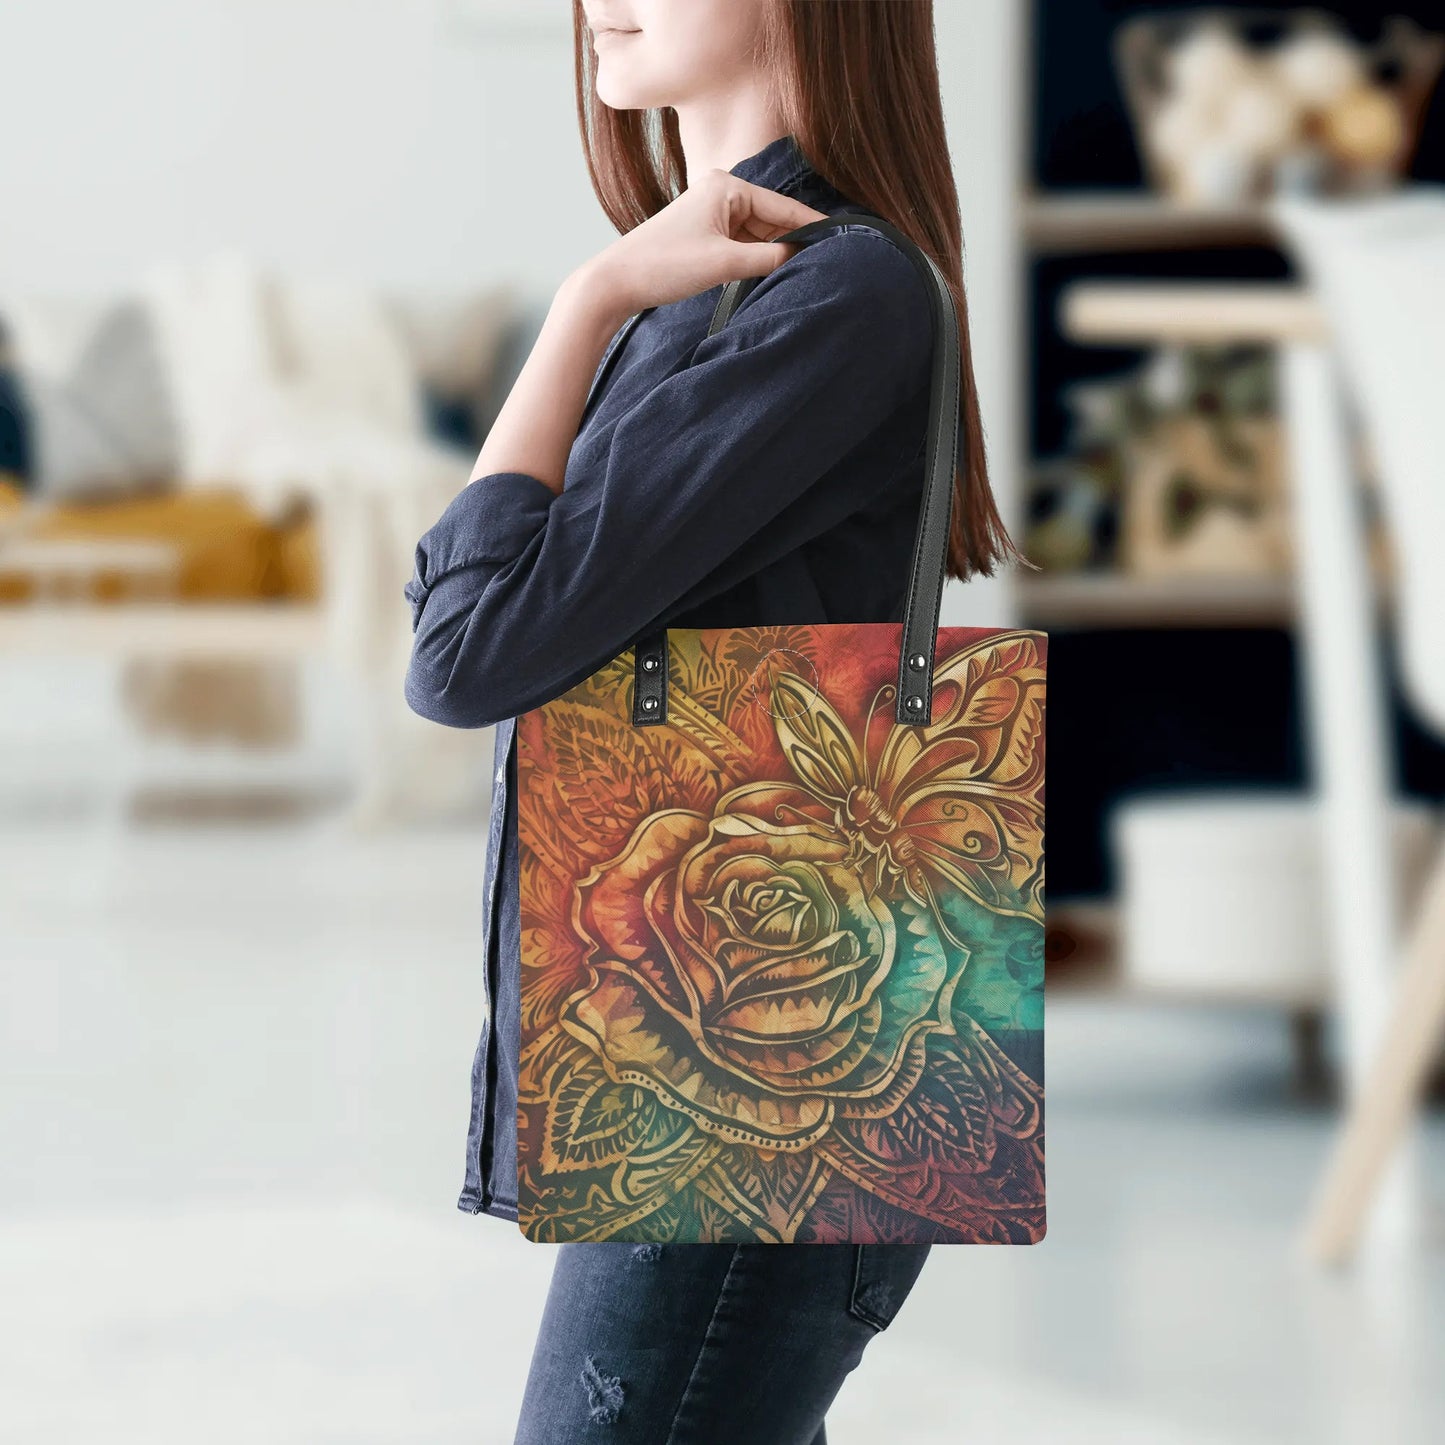 Rose Tribaln Butterfly Colorful Tote Leather Handbag